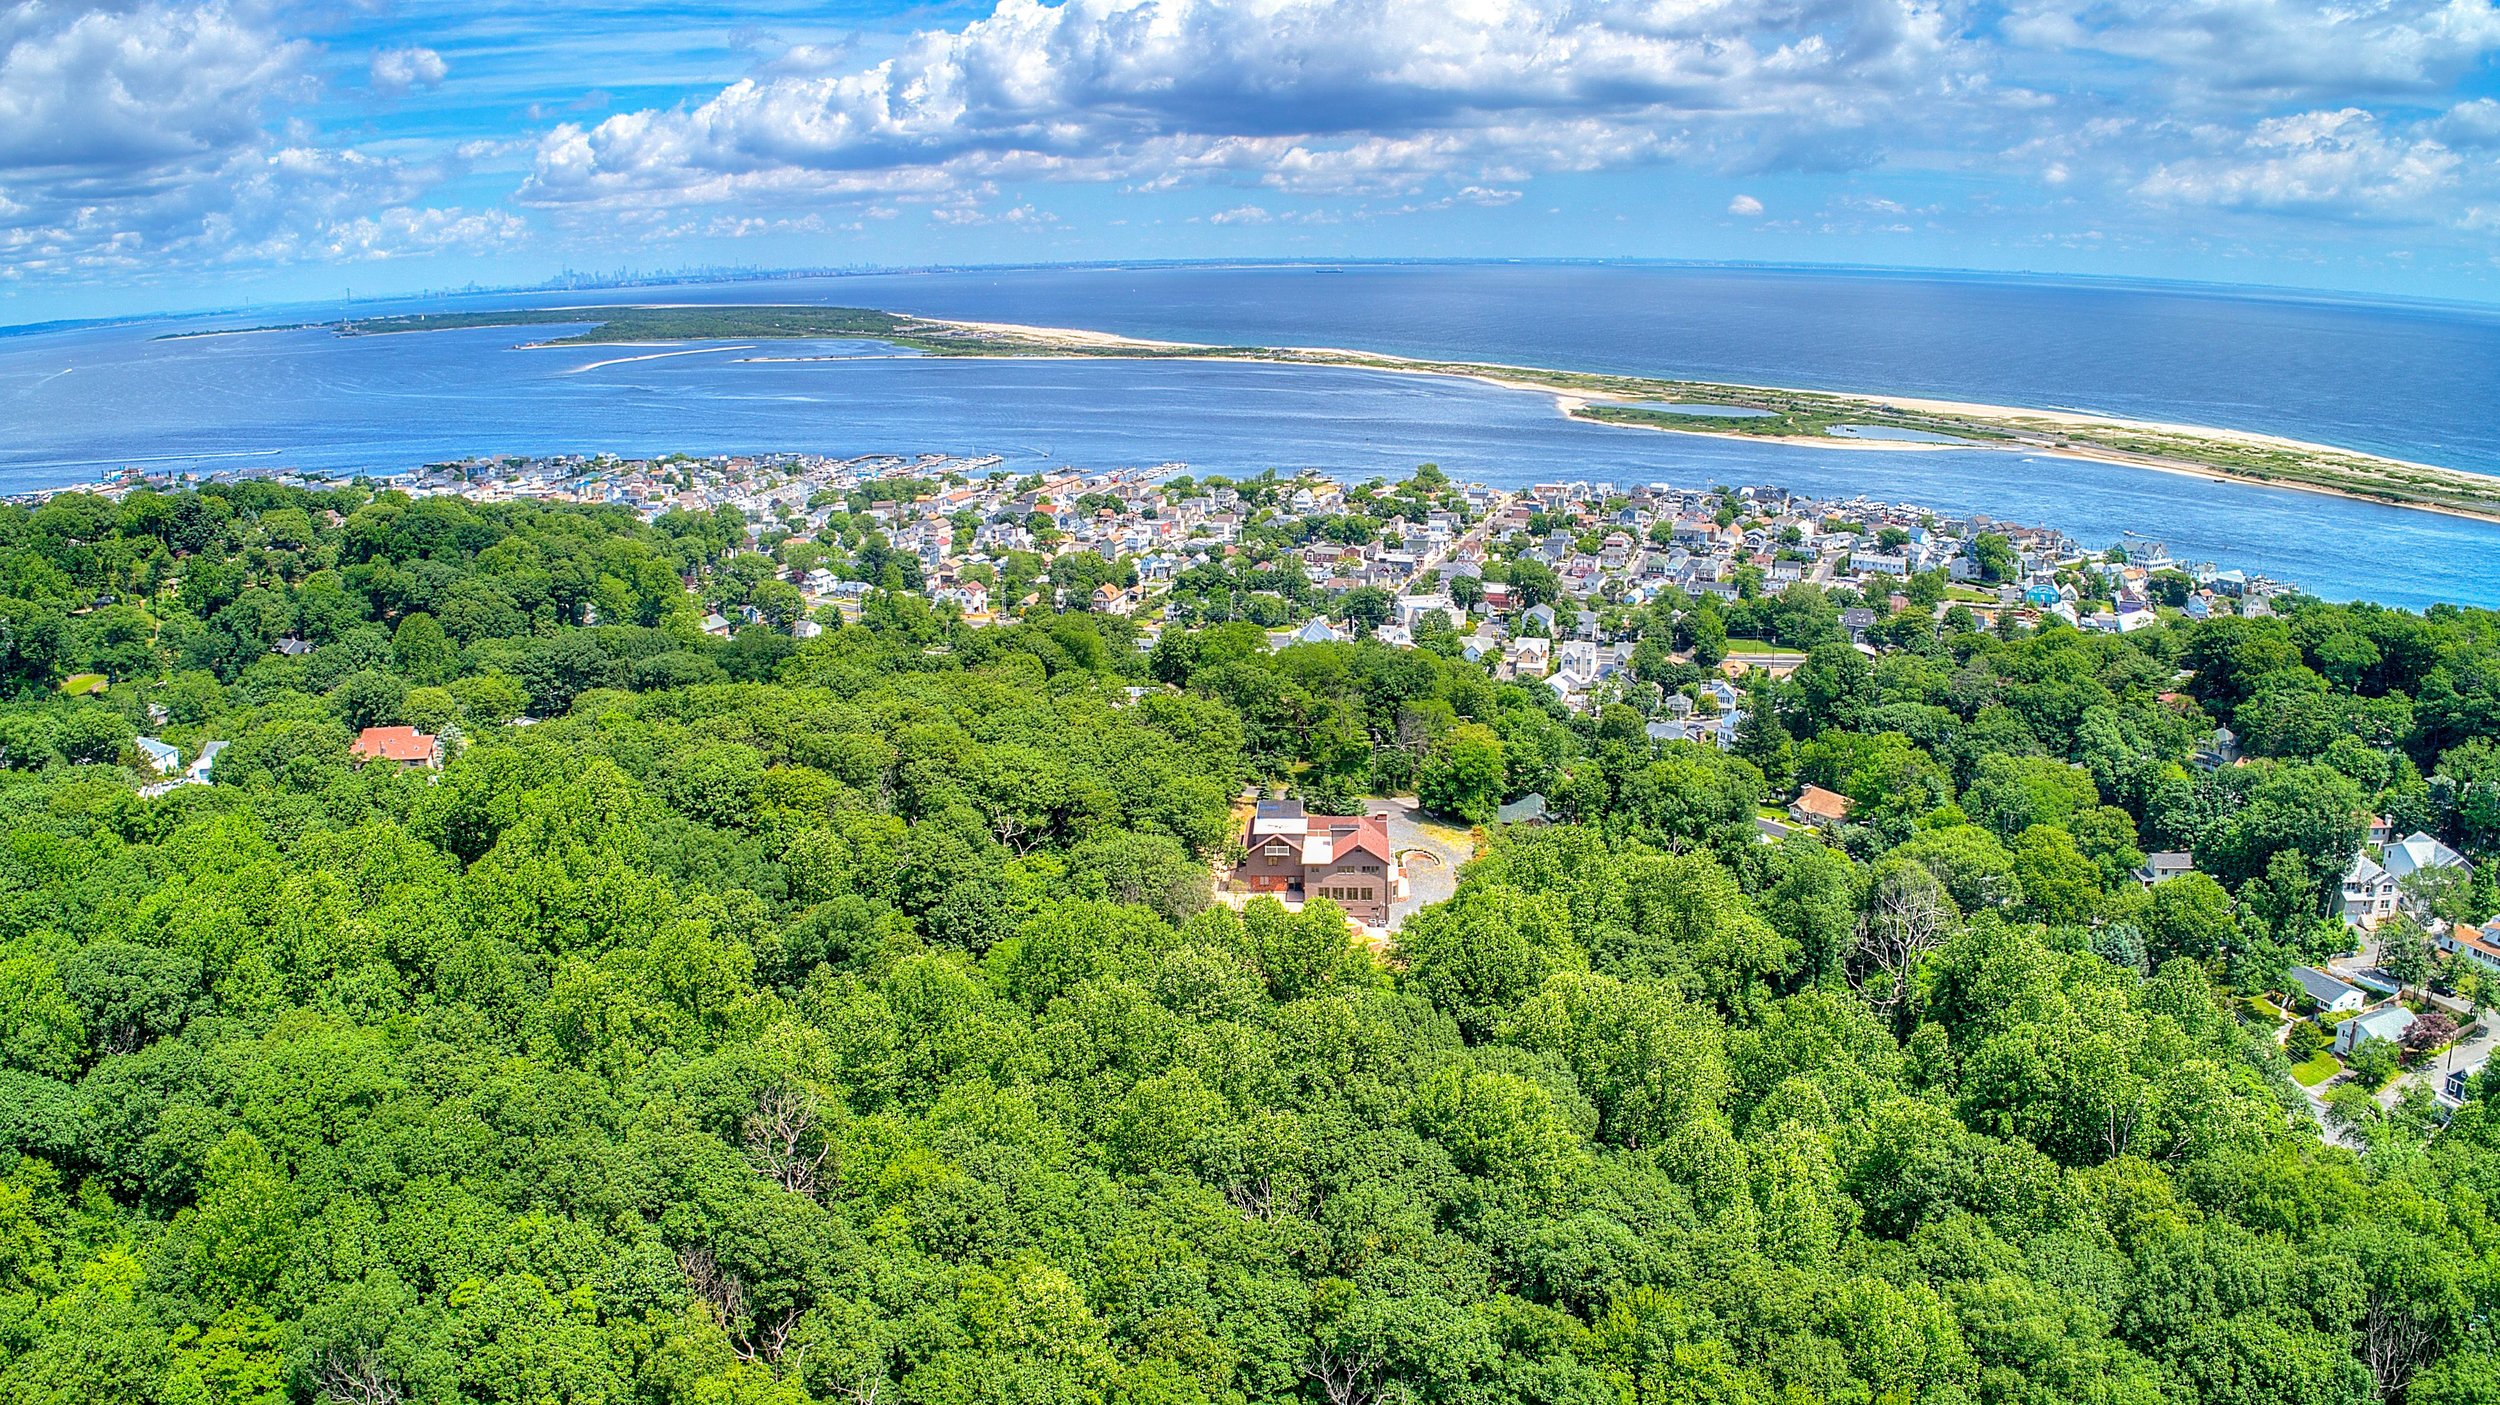 Drone Photography Highlands New Jersey Real Estate Home on the hill across from the ocean